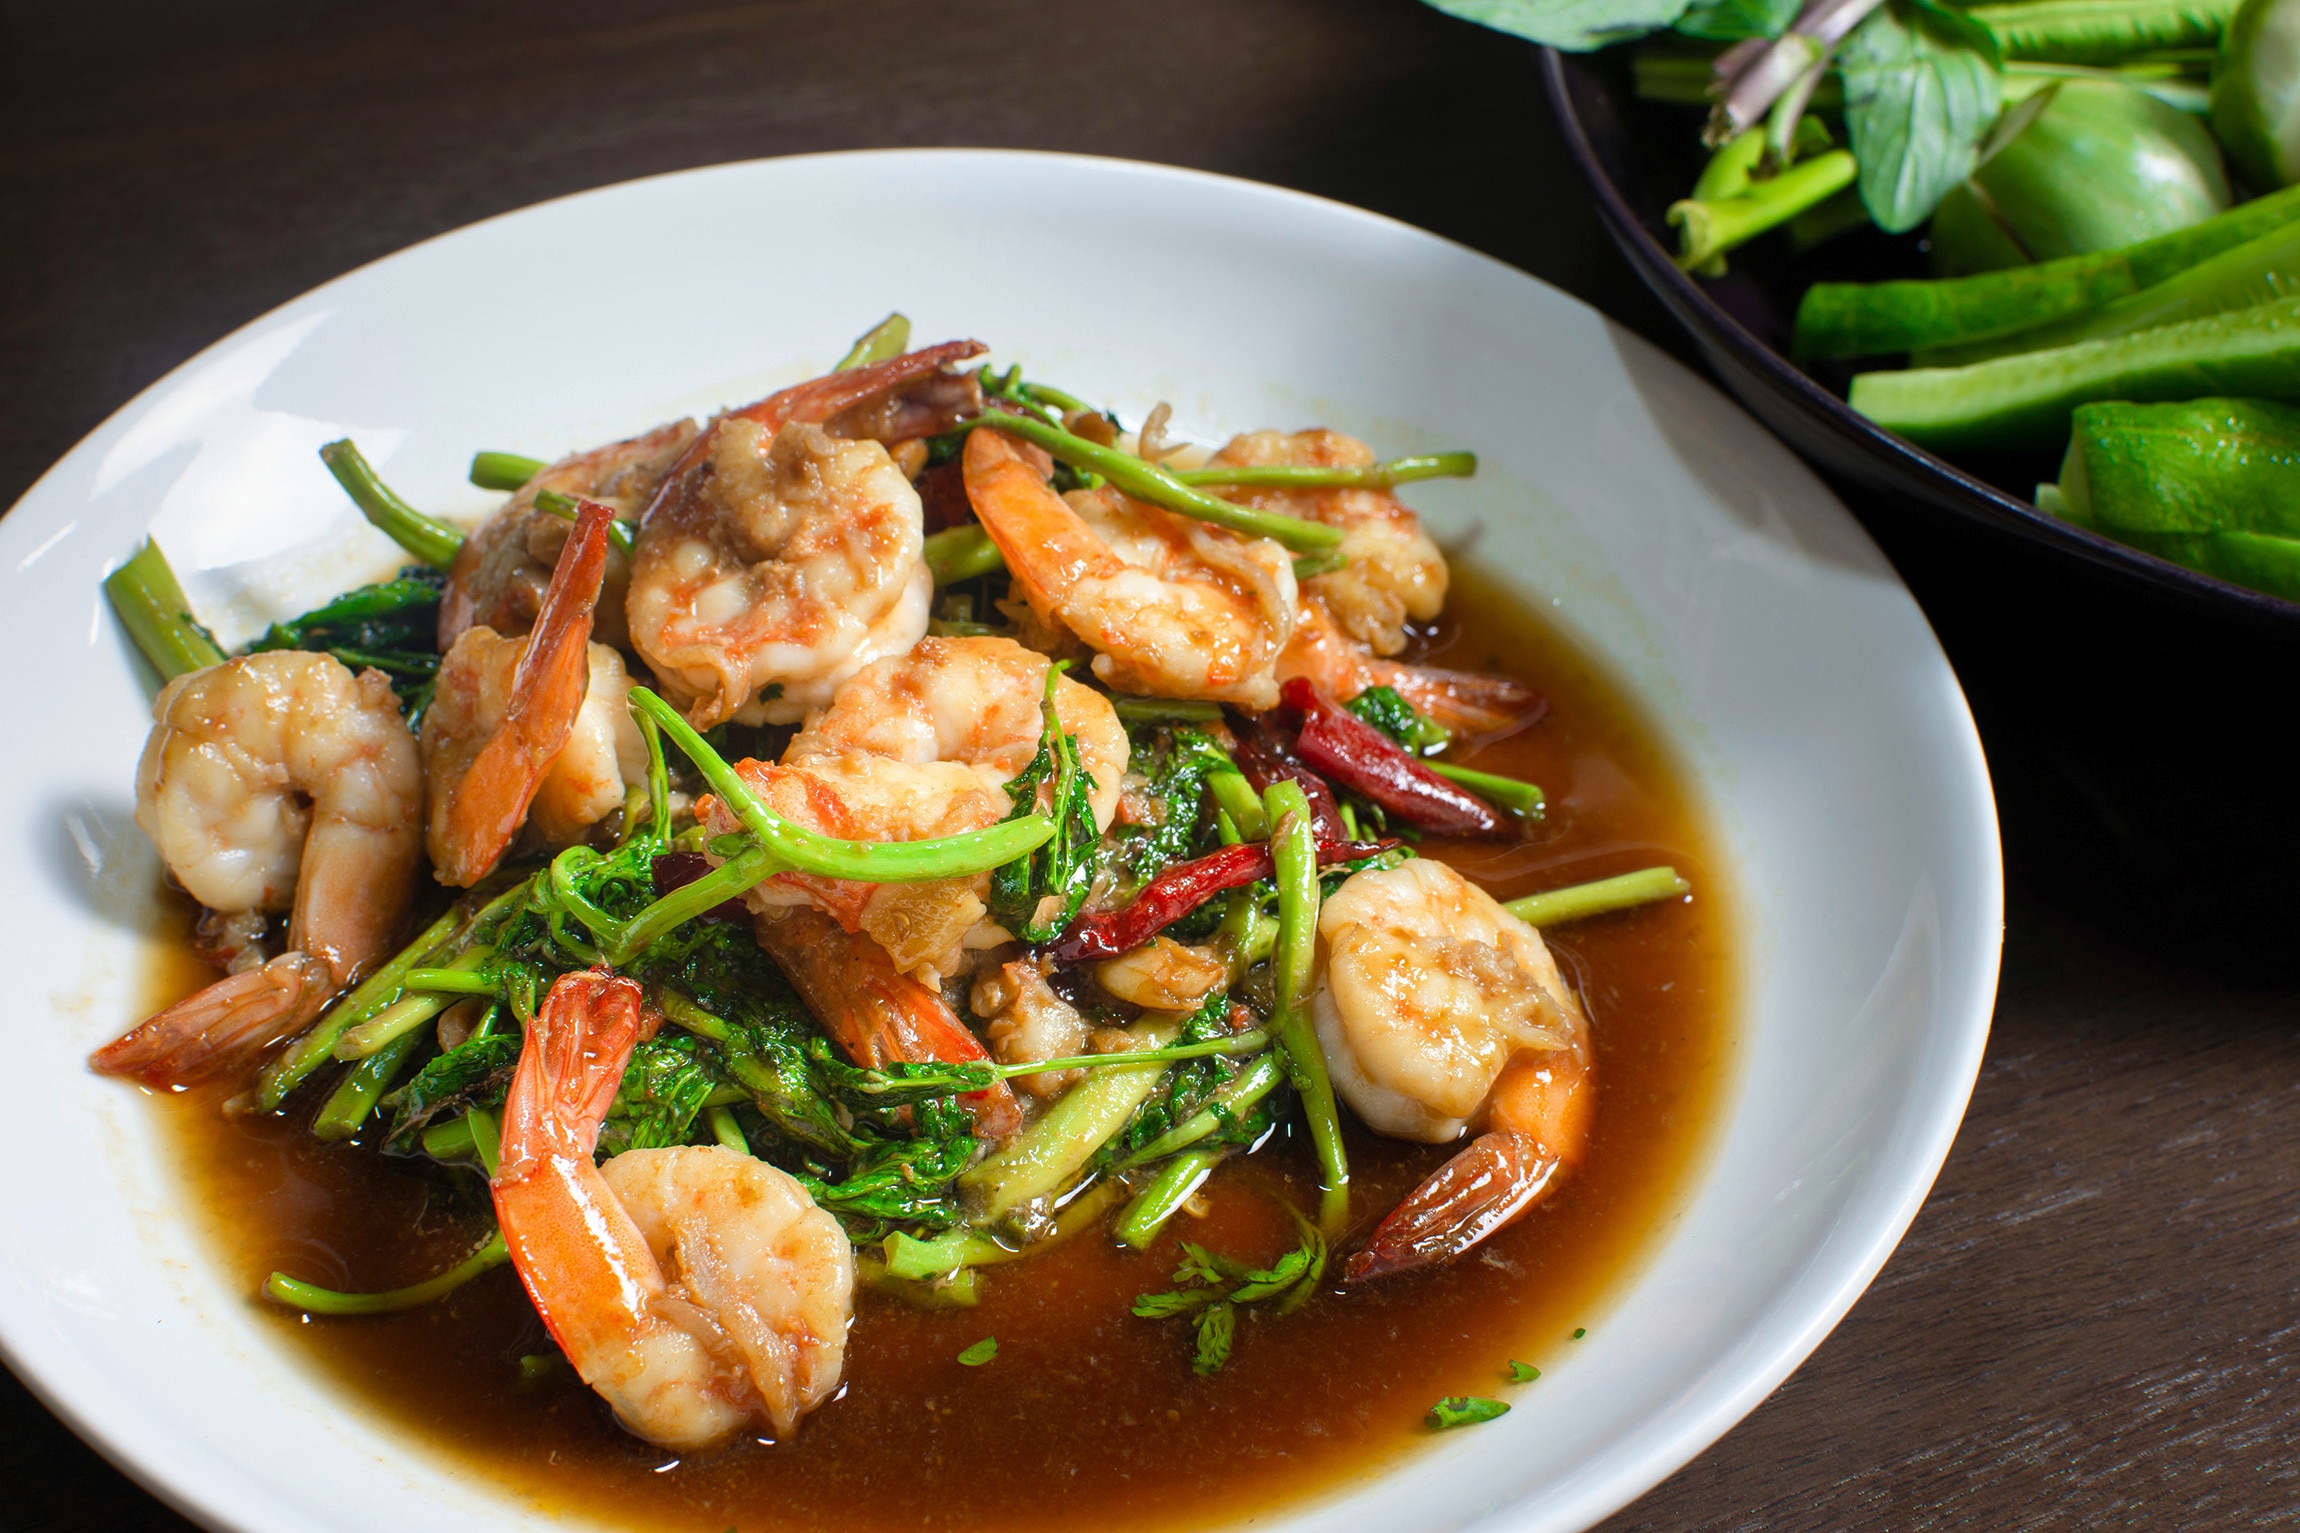 Stir-fried shrimp and kangkong in oyster sauce topped with chilies